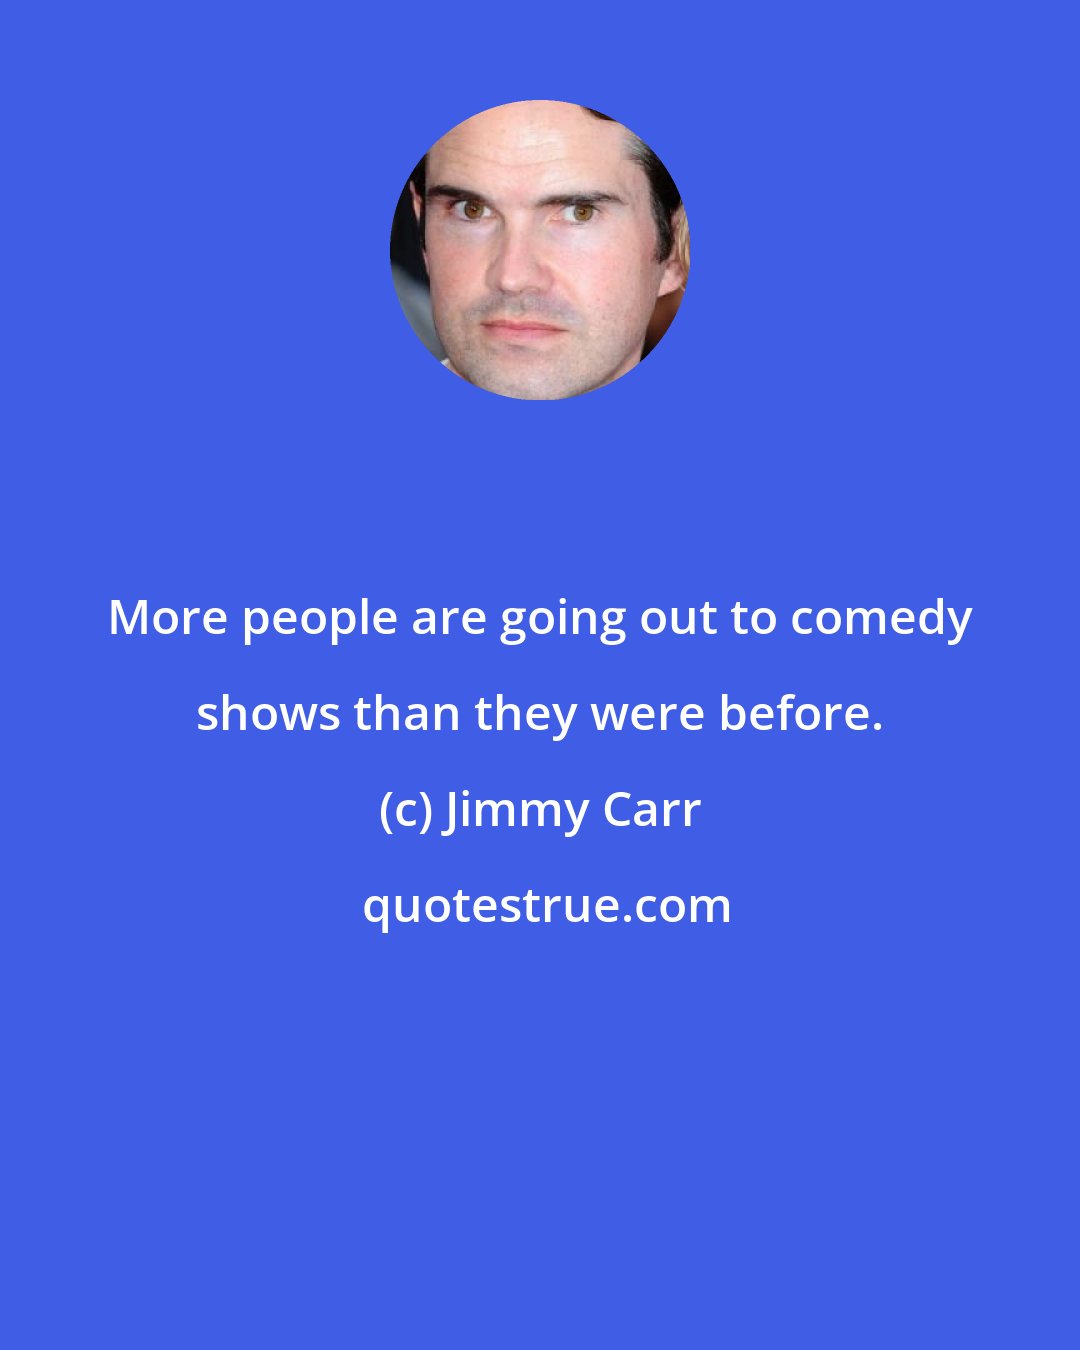 Jimmy Carr: More people are going out to comedy shows than they were before.